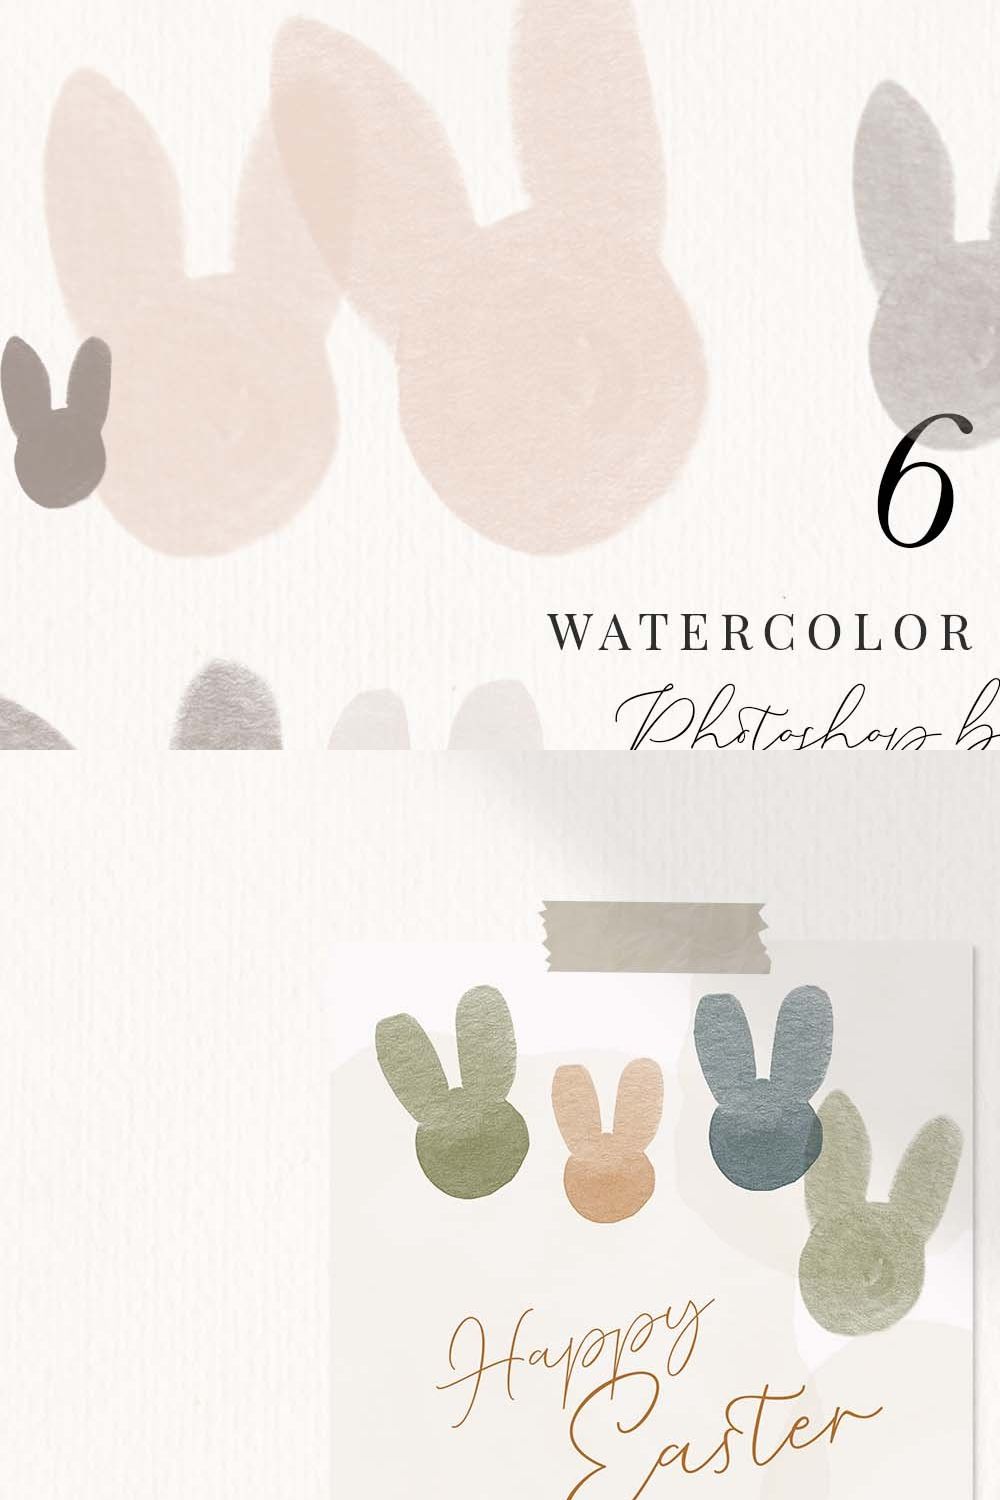 Watercolor Bunny Brushes pinterest preview image.